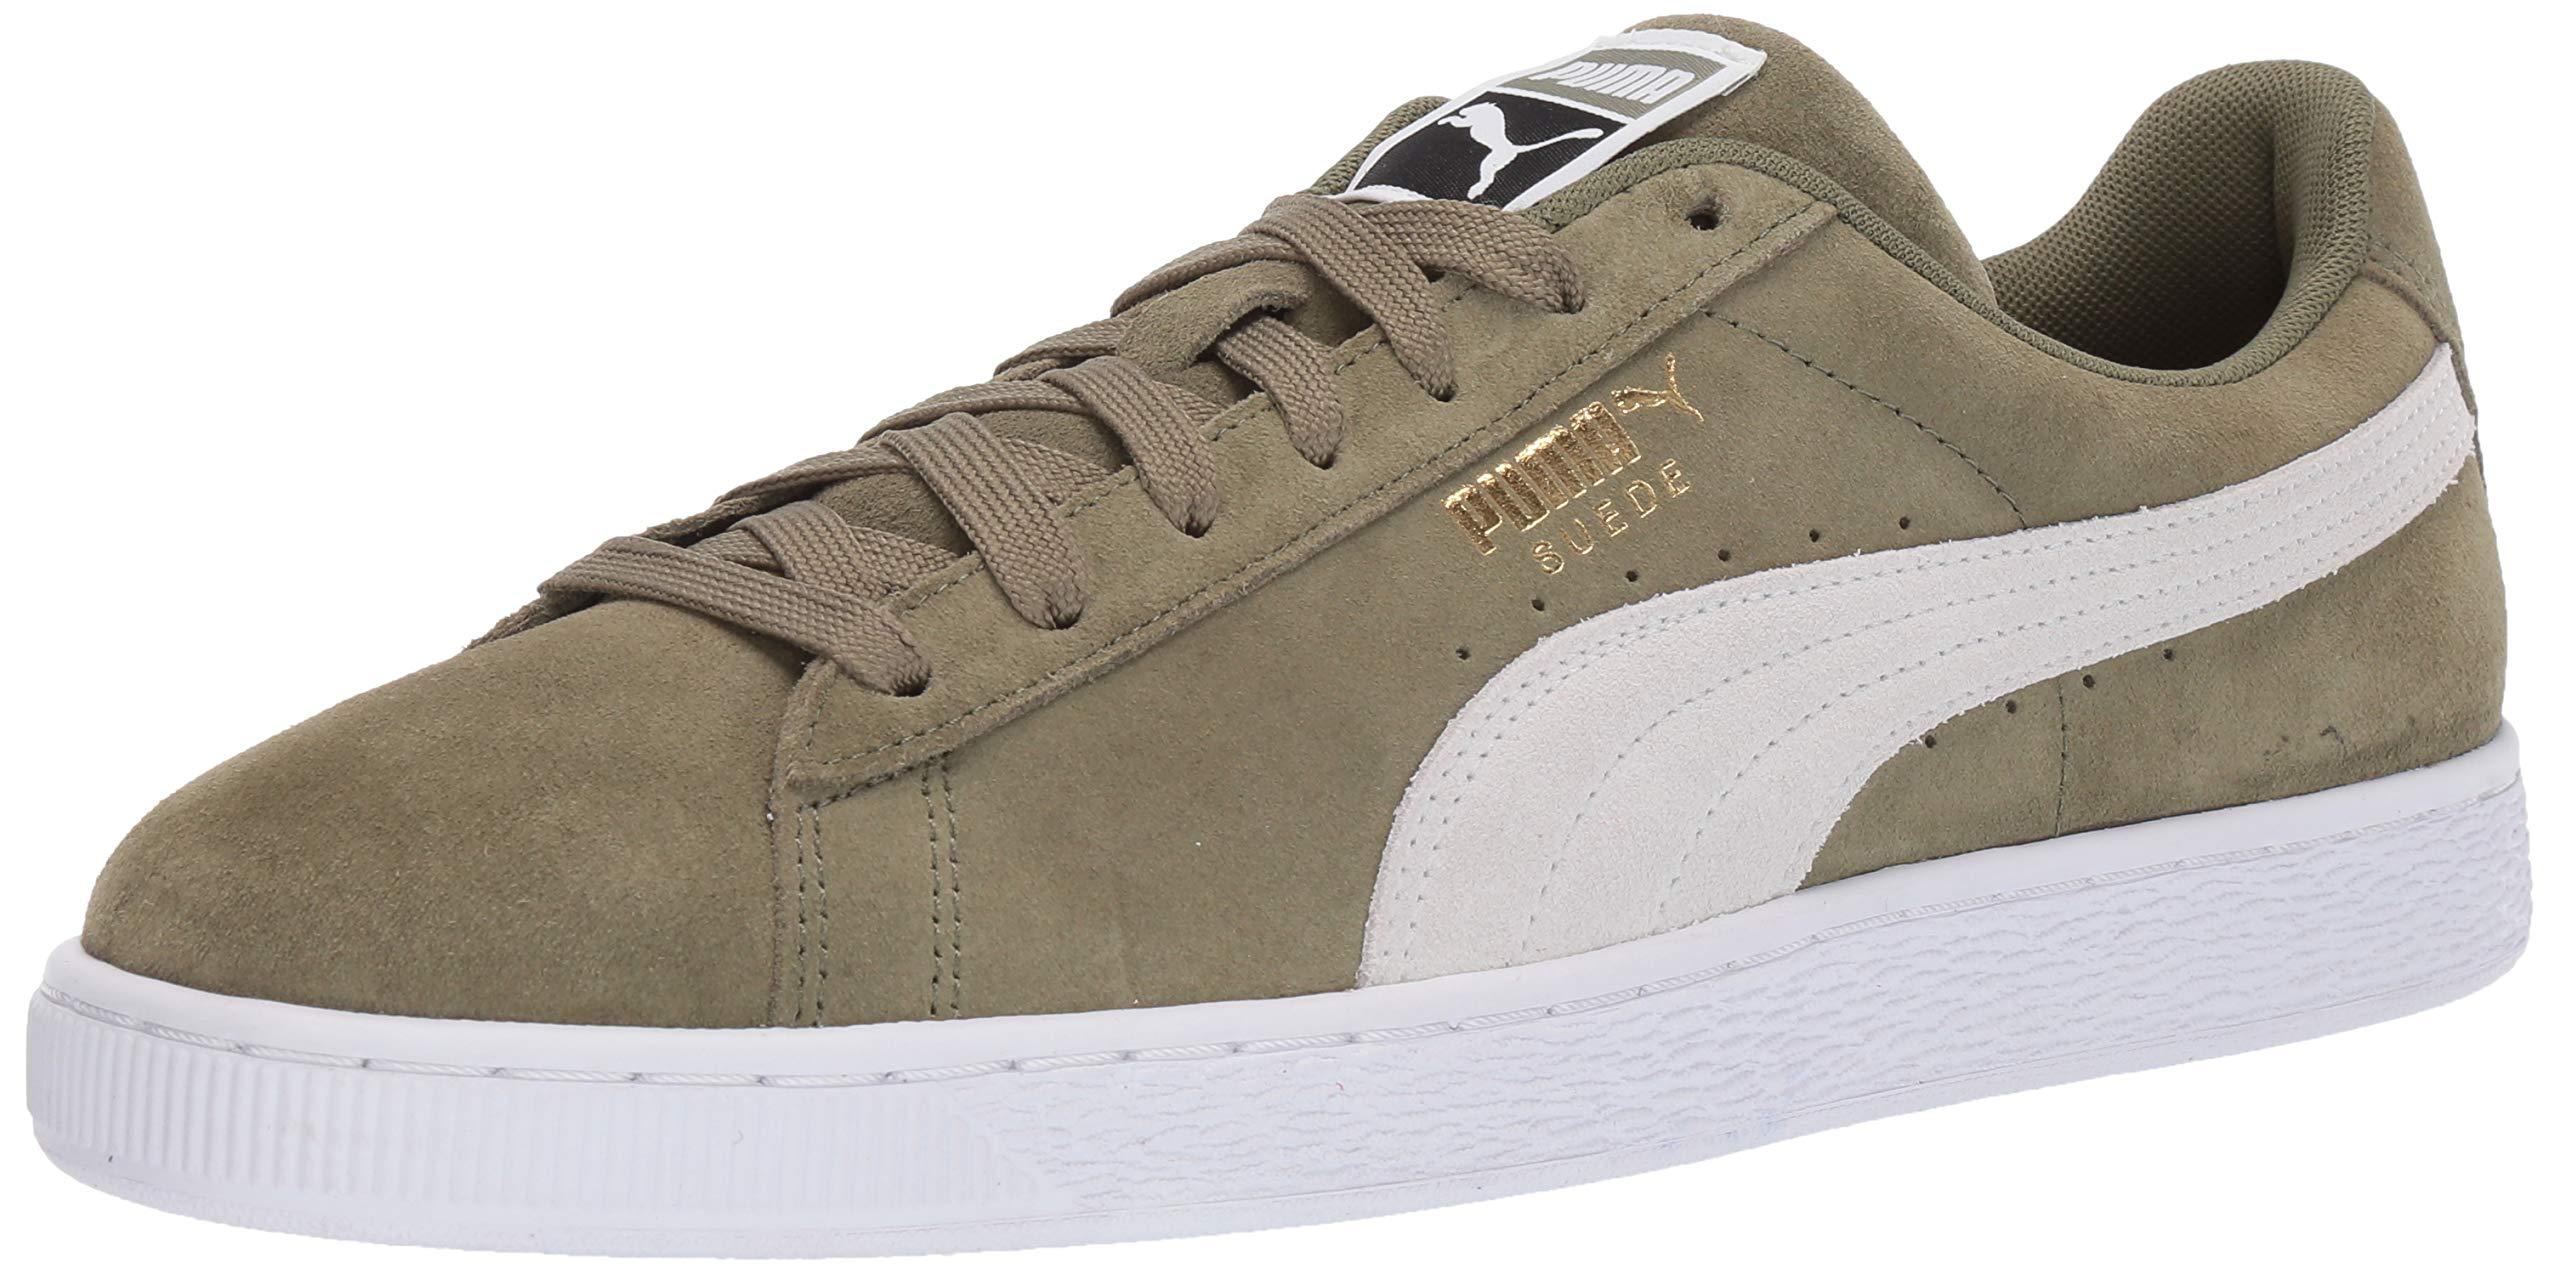 PUMA Suede Classic Sneaker in Green for Men - Save 53% - Lyst